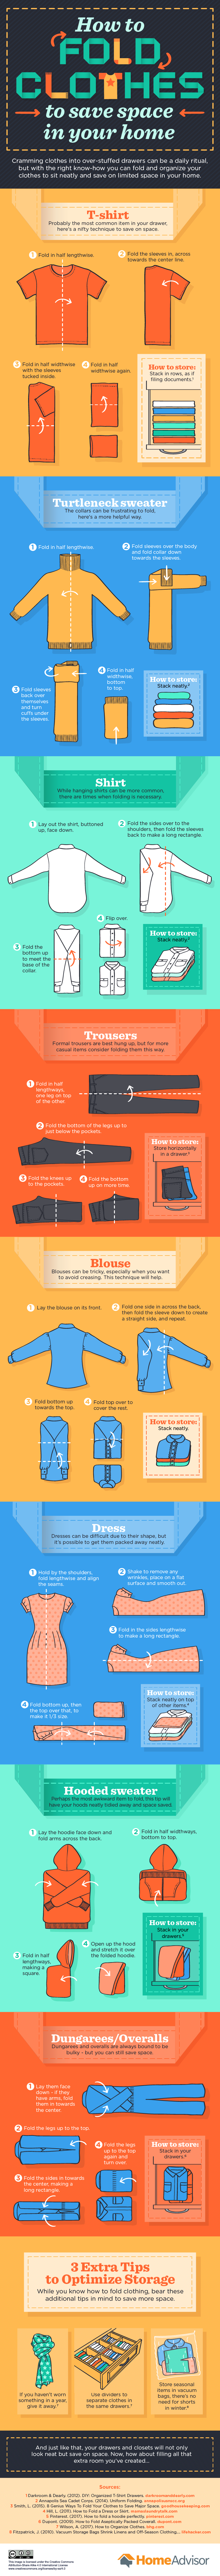 How To Fold Clothes To Save Space In Drawers Homeadvisor